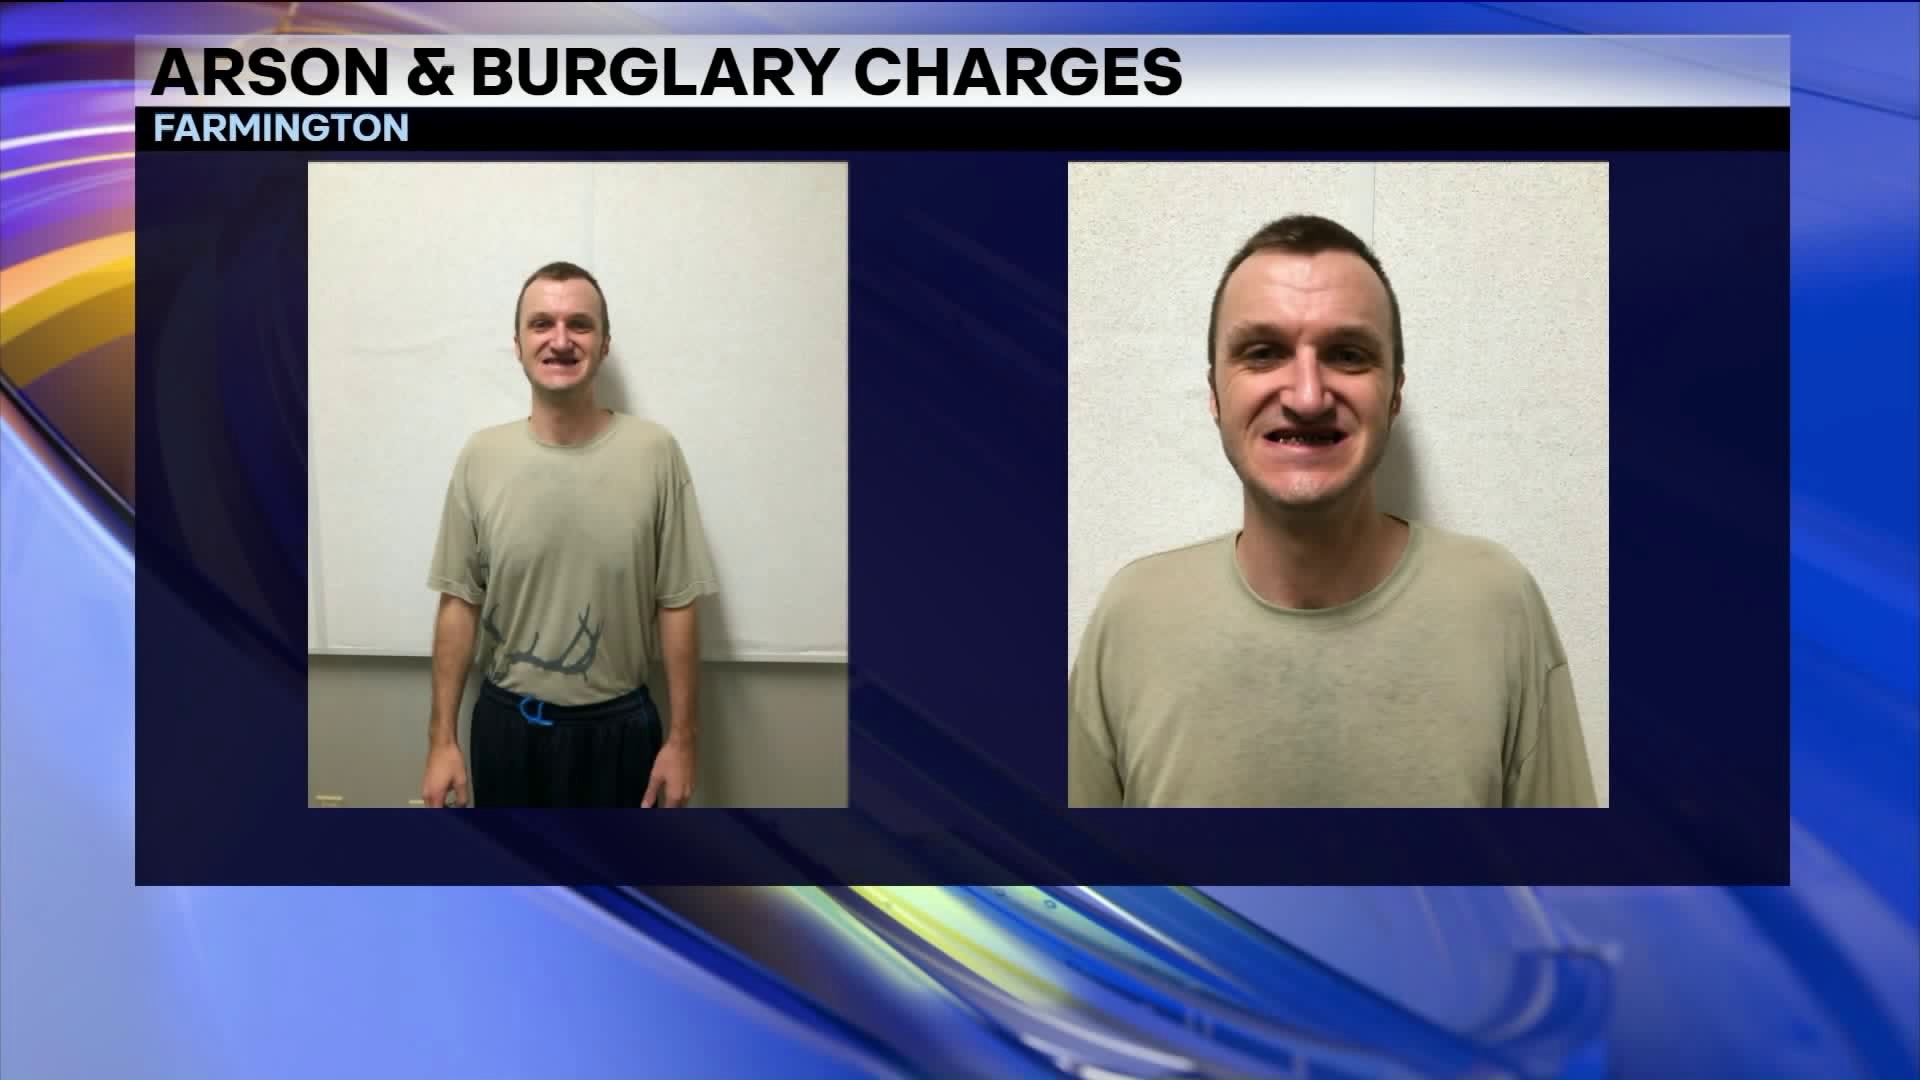 Suspect Arrested On Arson And Burglary Charges After Farmington Dental Office Vandalized